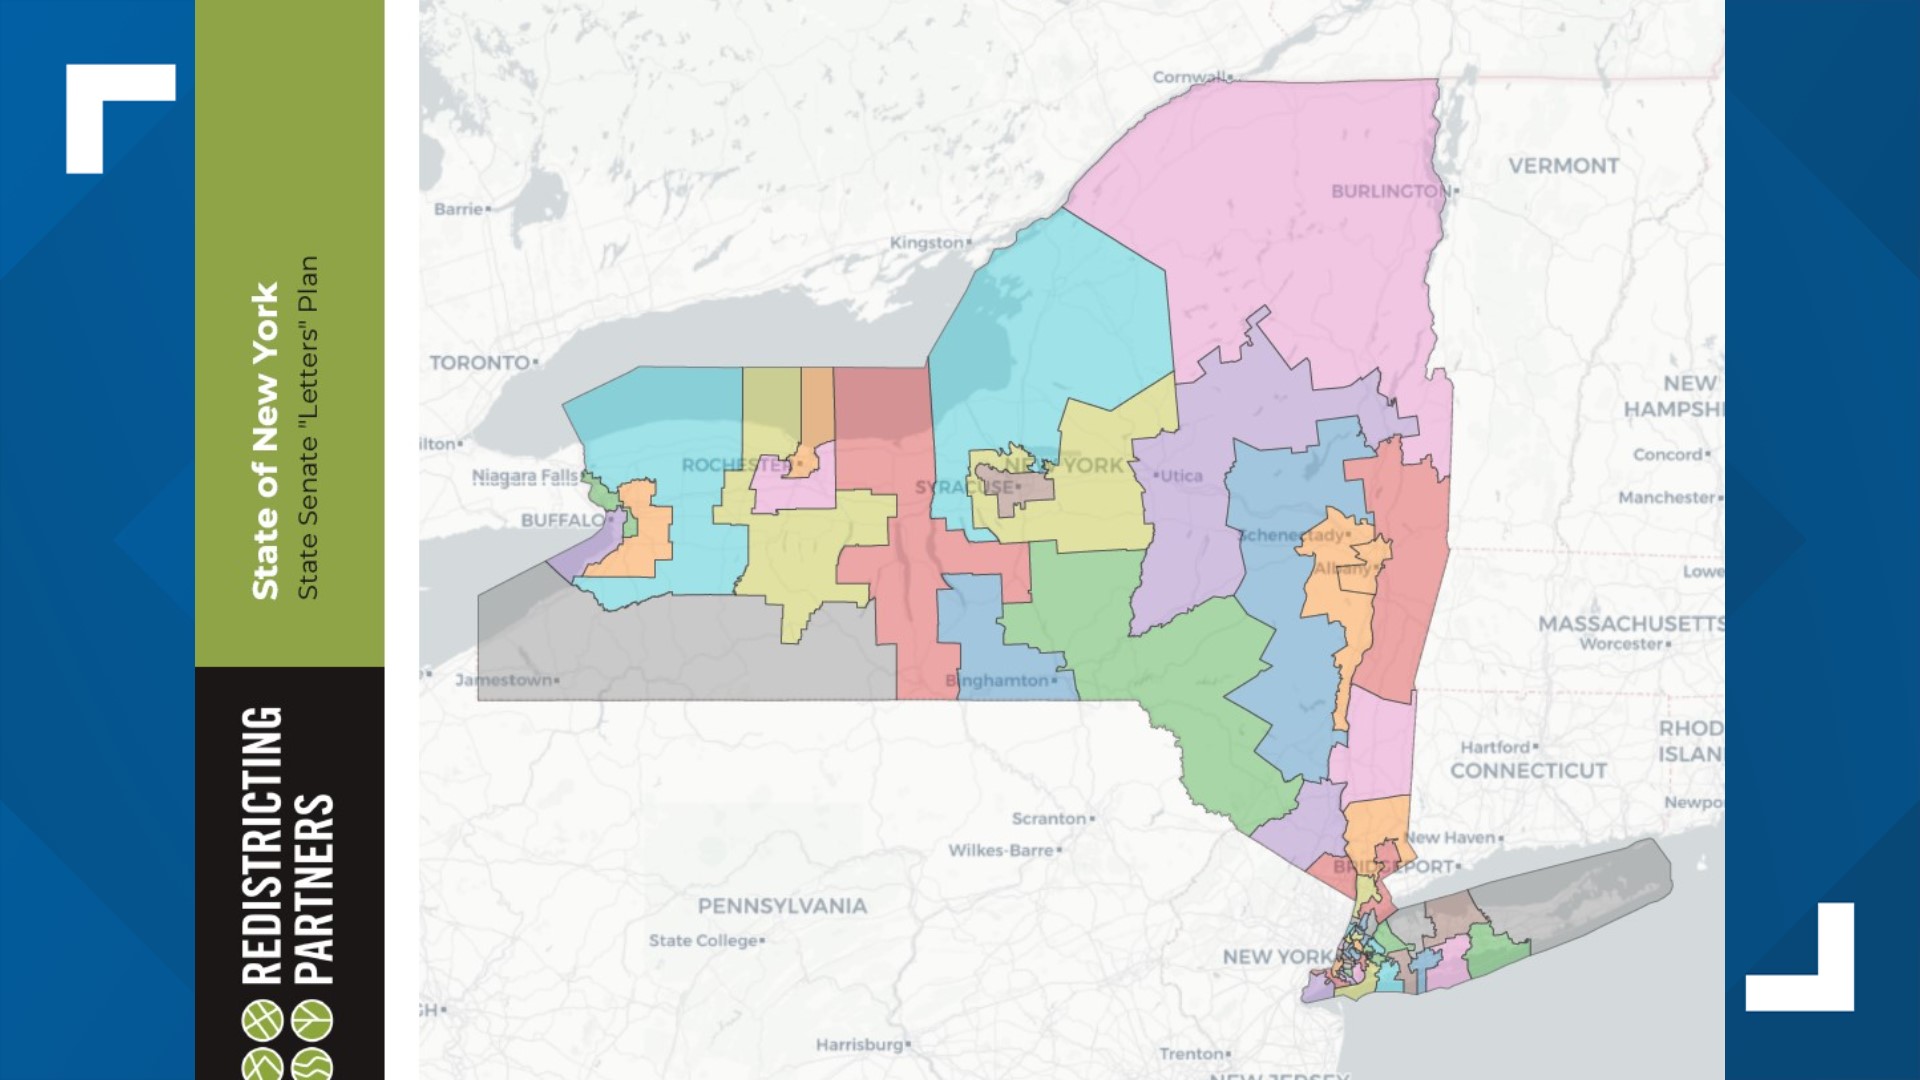 2 maps for potential U.S. congressional districts in New York revealed